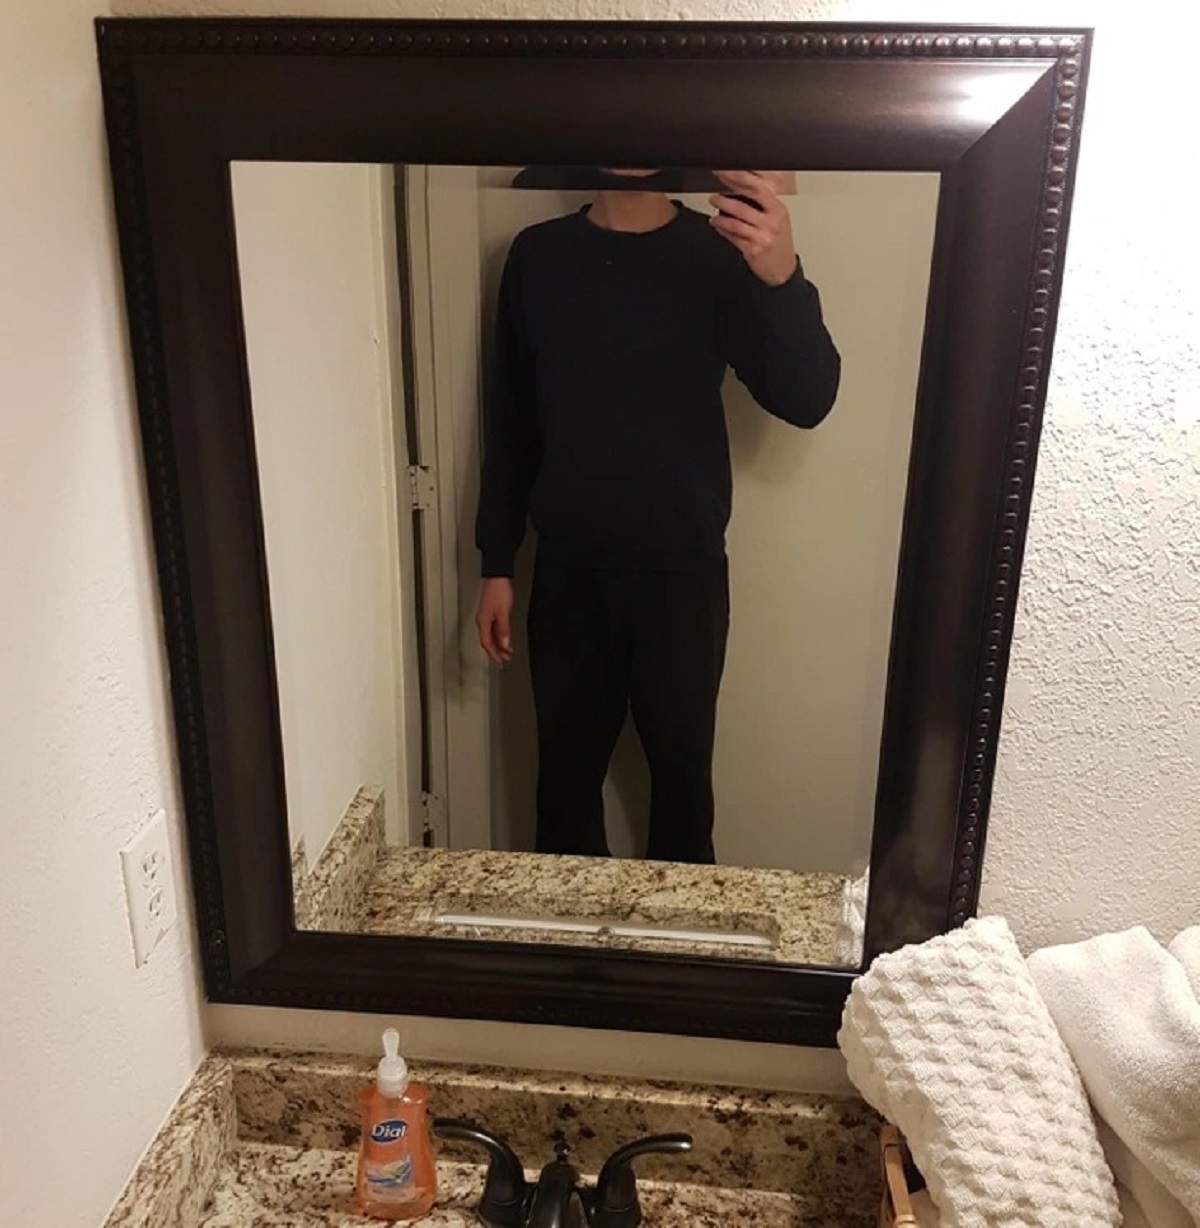 “The mirror at this rental house is placed too low to see myself without hunching.”